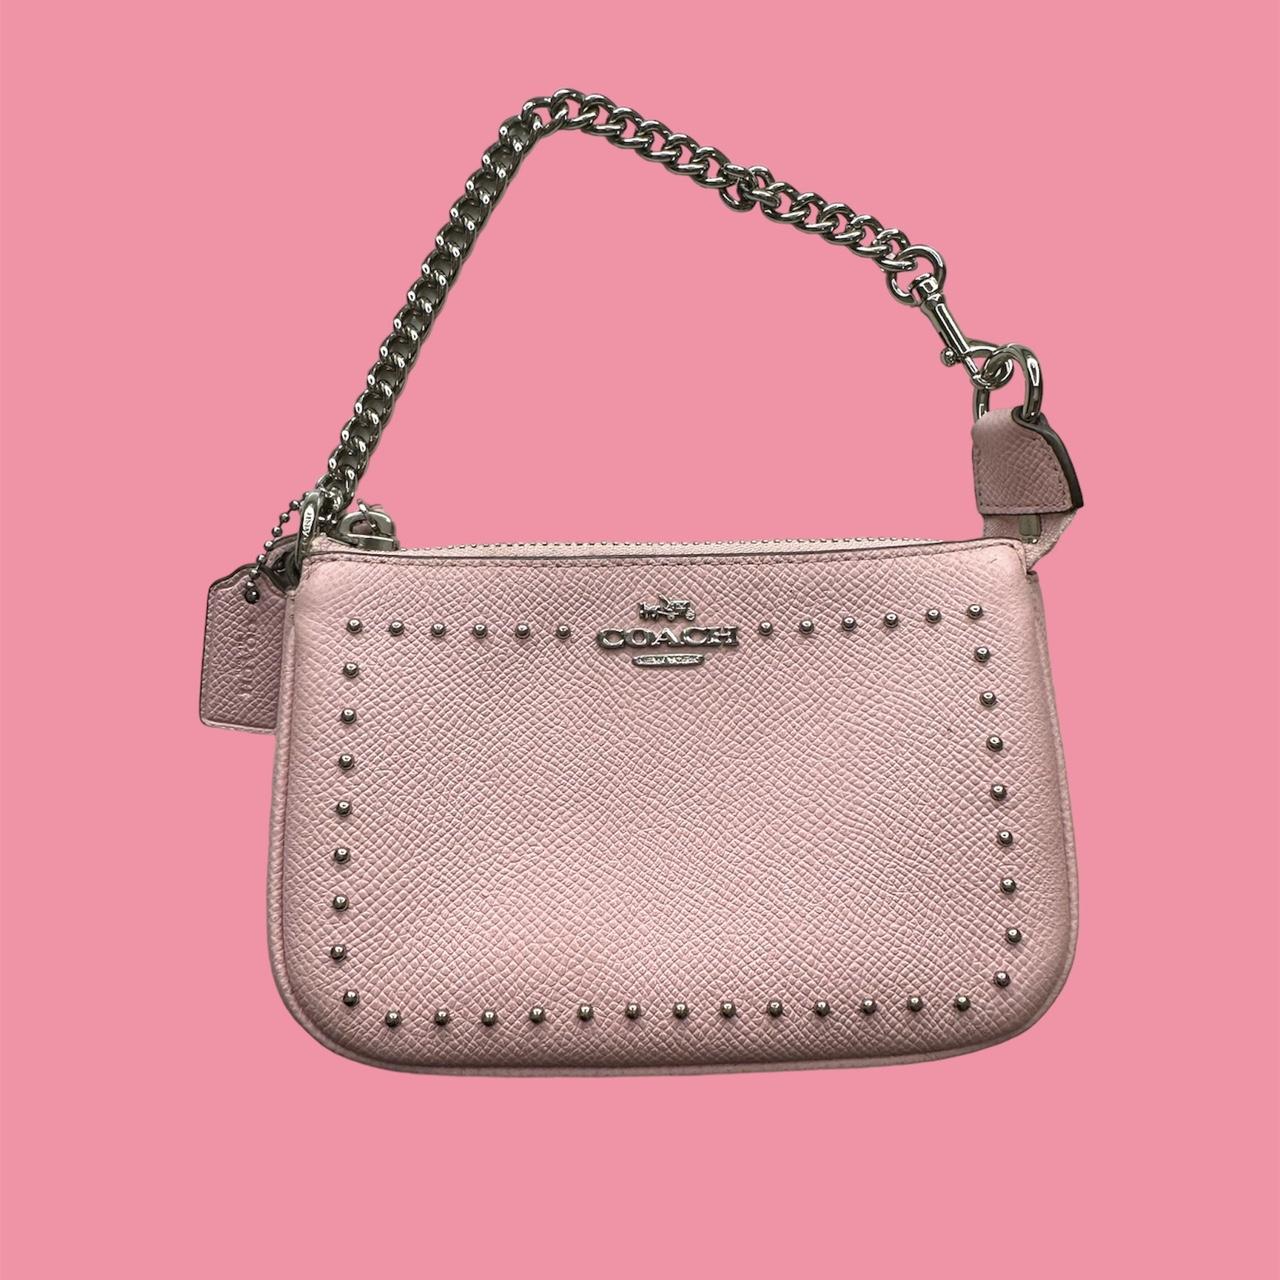 Coach Women's Leather Bag - Pink